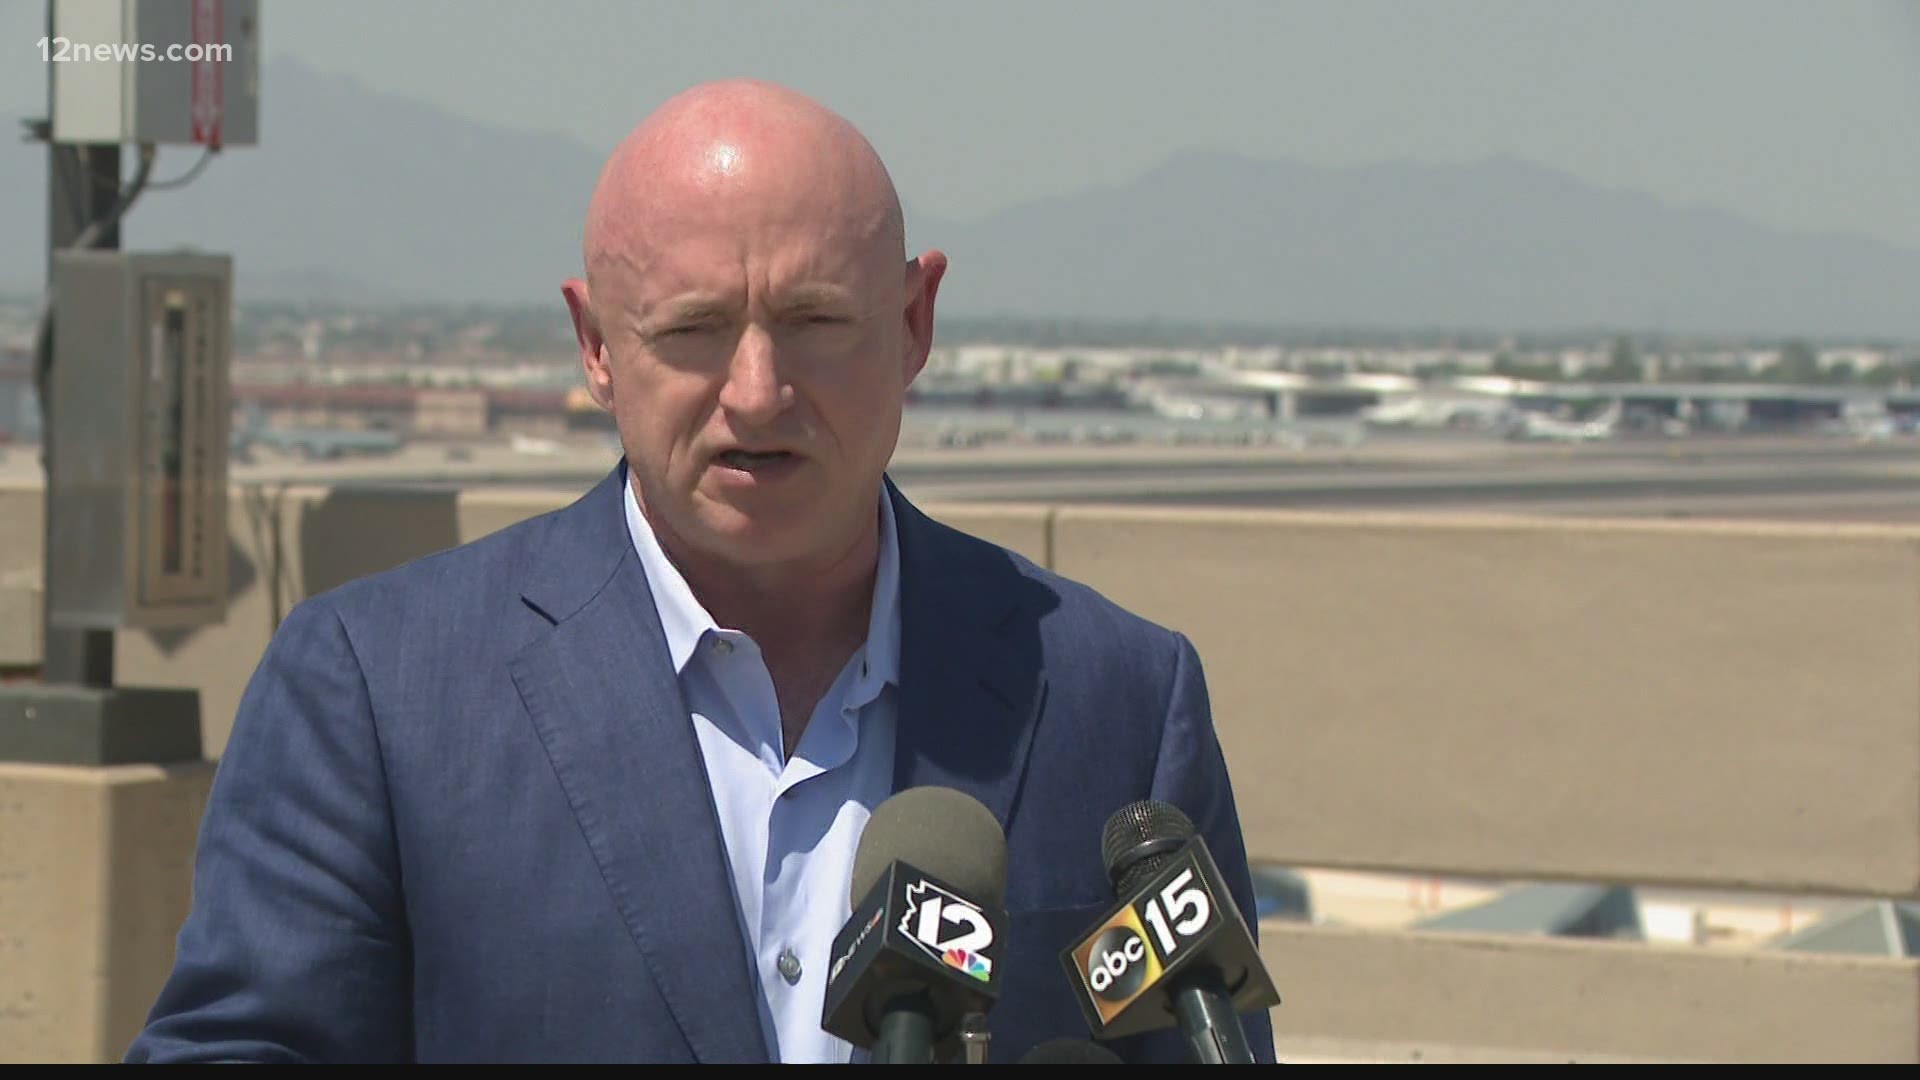 U.S. Senator Mark Kelly used a tour of Sky Harbor Airport to tout the bipartisan infrastructure plan working its way through the Senate on Thursday.